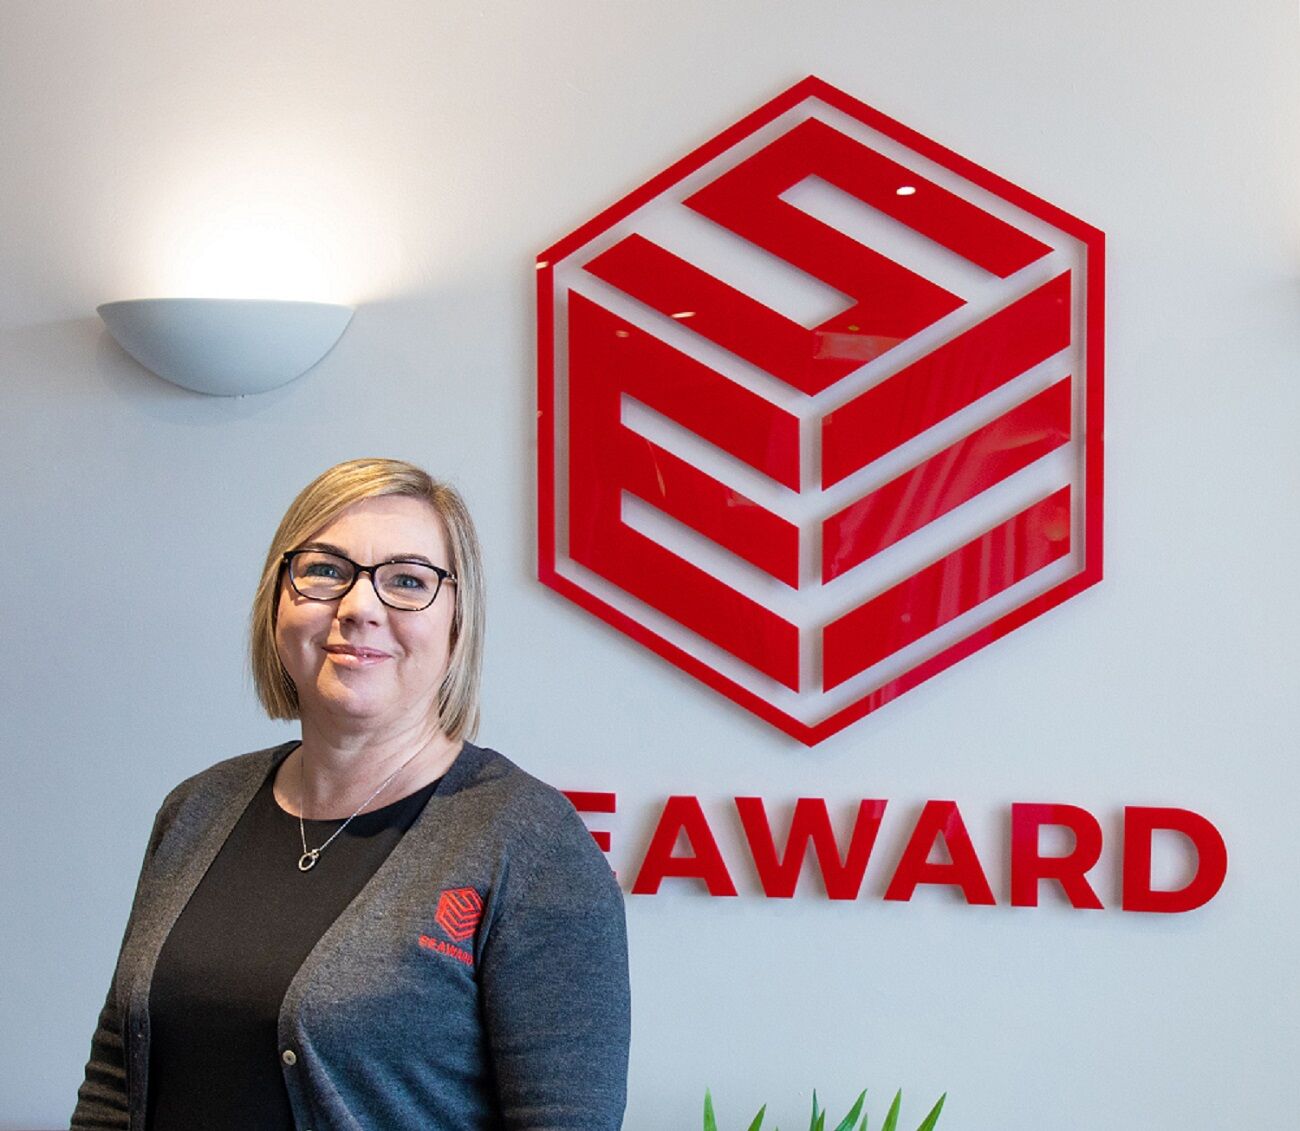 New appointments spearhead growth for Seaward brands in 2023